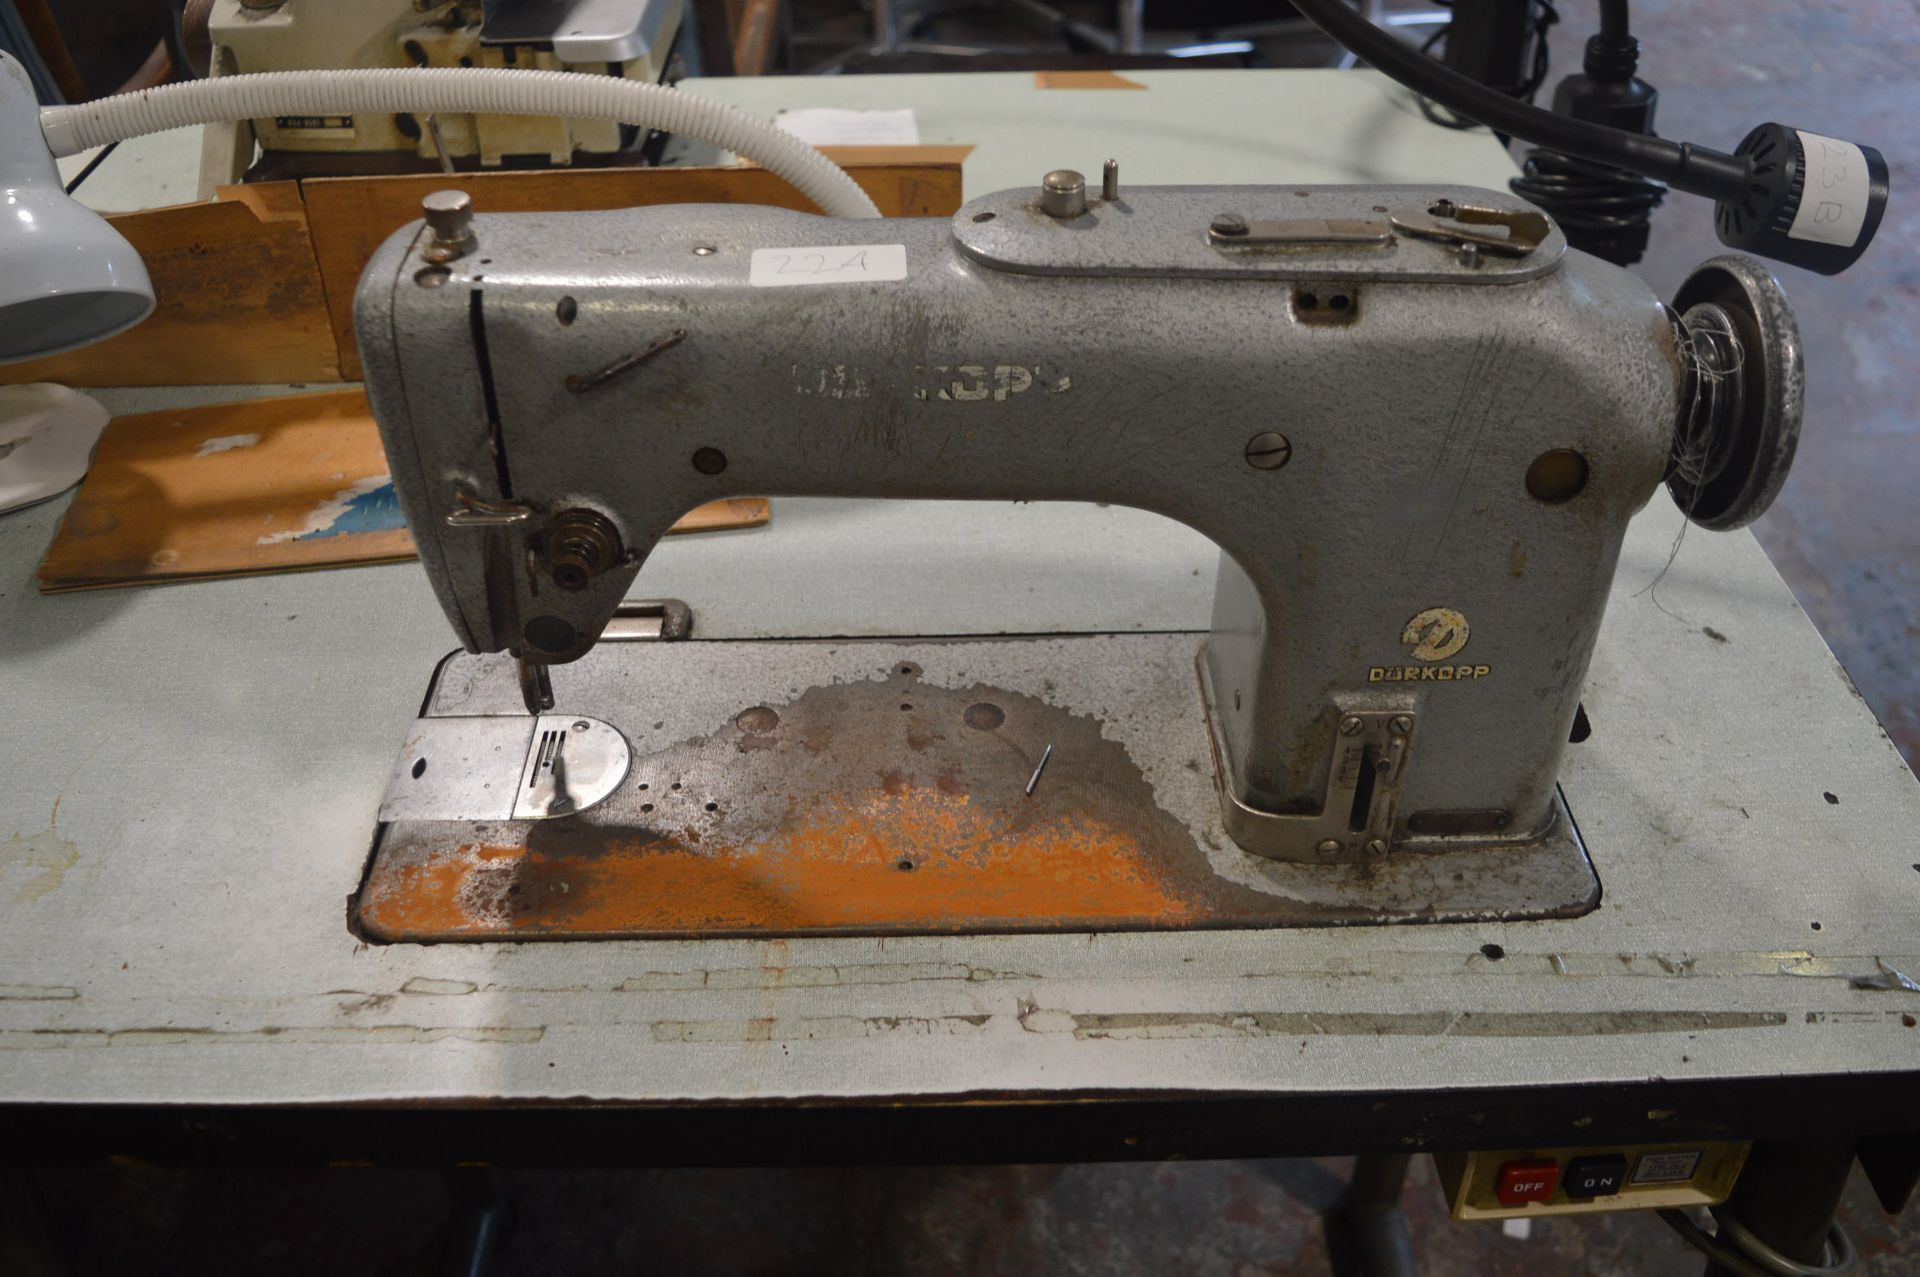 Durkopp Flatbed Industrial Sewing Machine on Table with Electric Motor - Image 2 of 2